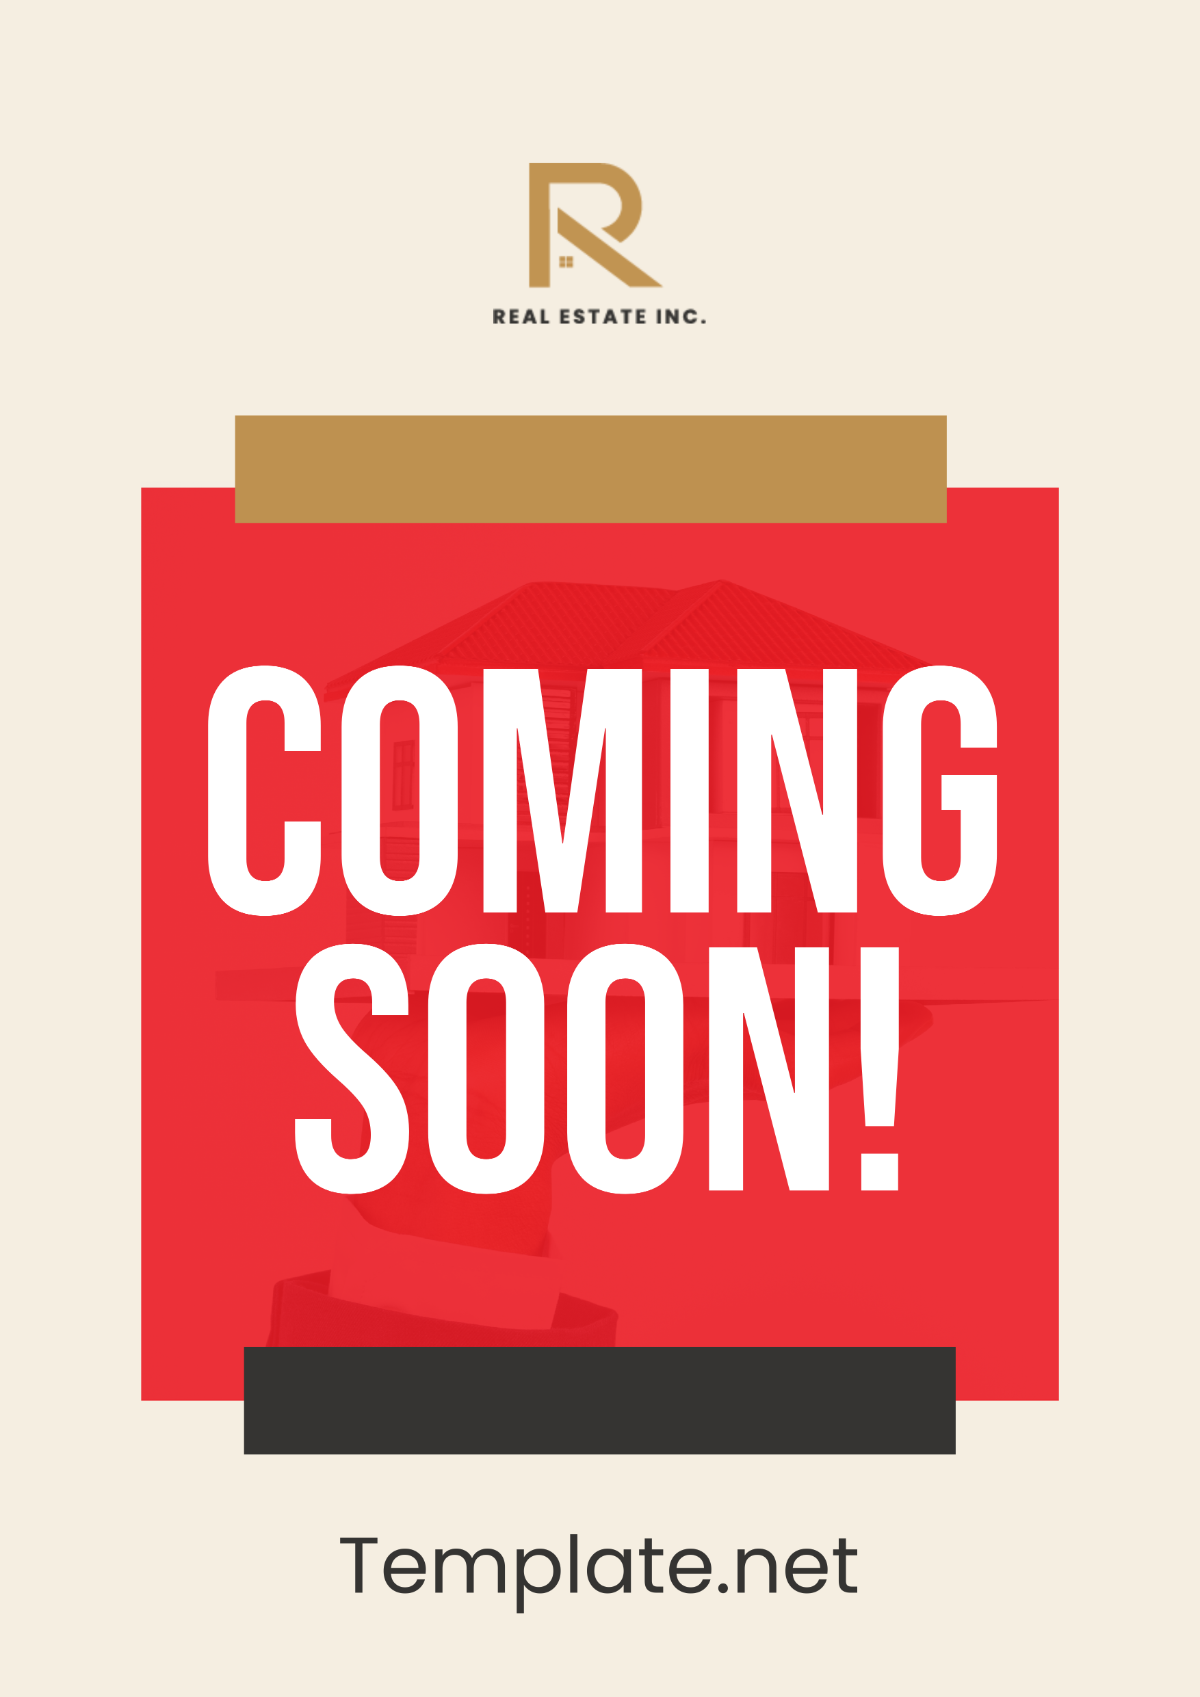 Coming Soon Property Signage Template